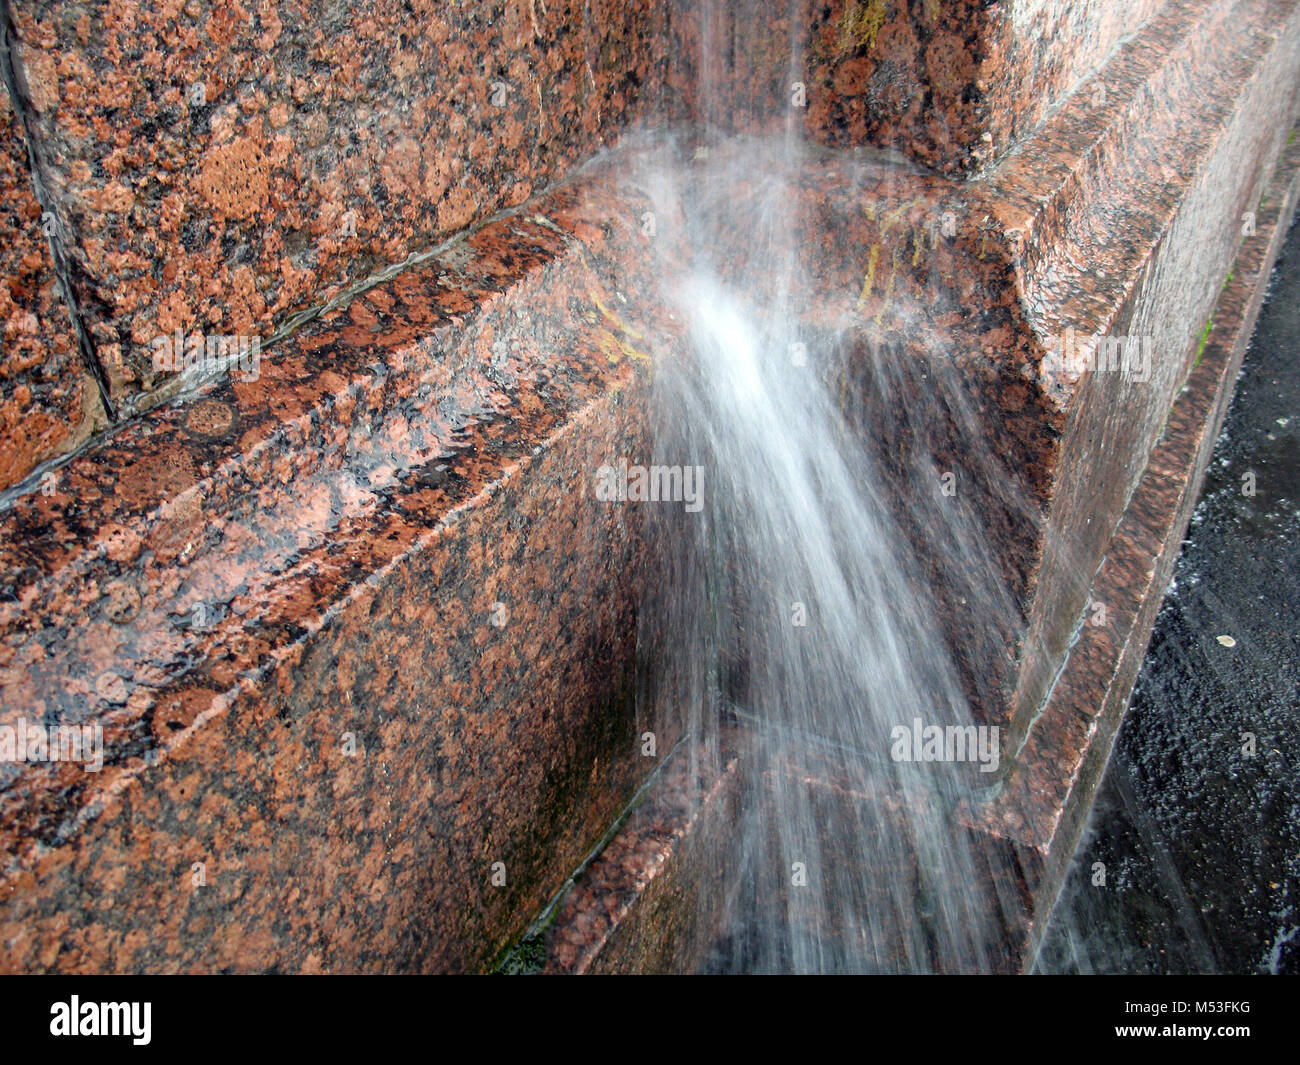 A strong jet of water flowing from the downspout on the granite wall during the rainstorm Stock Photo